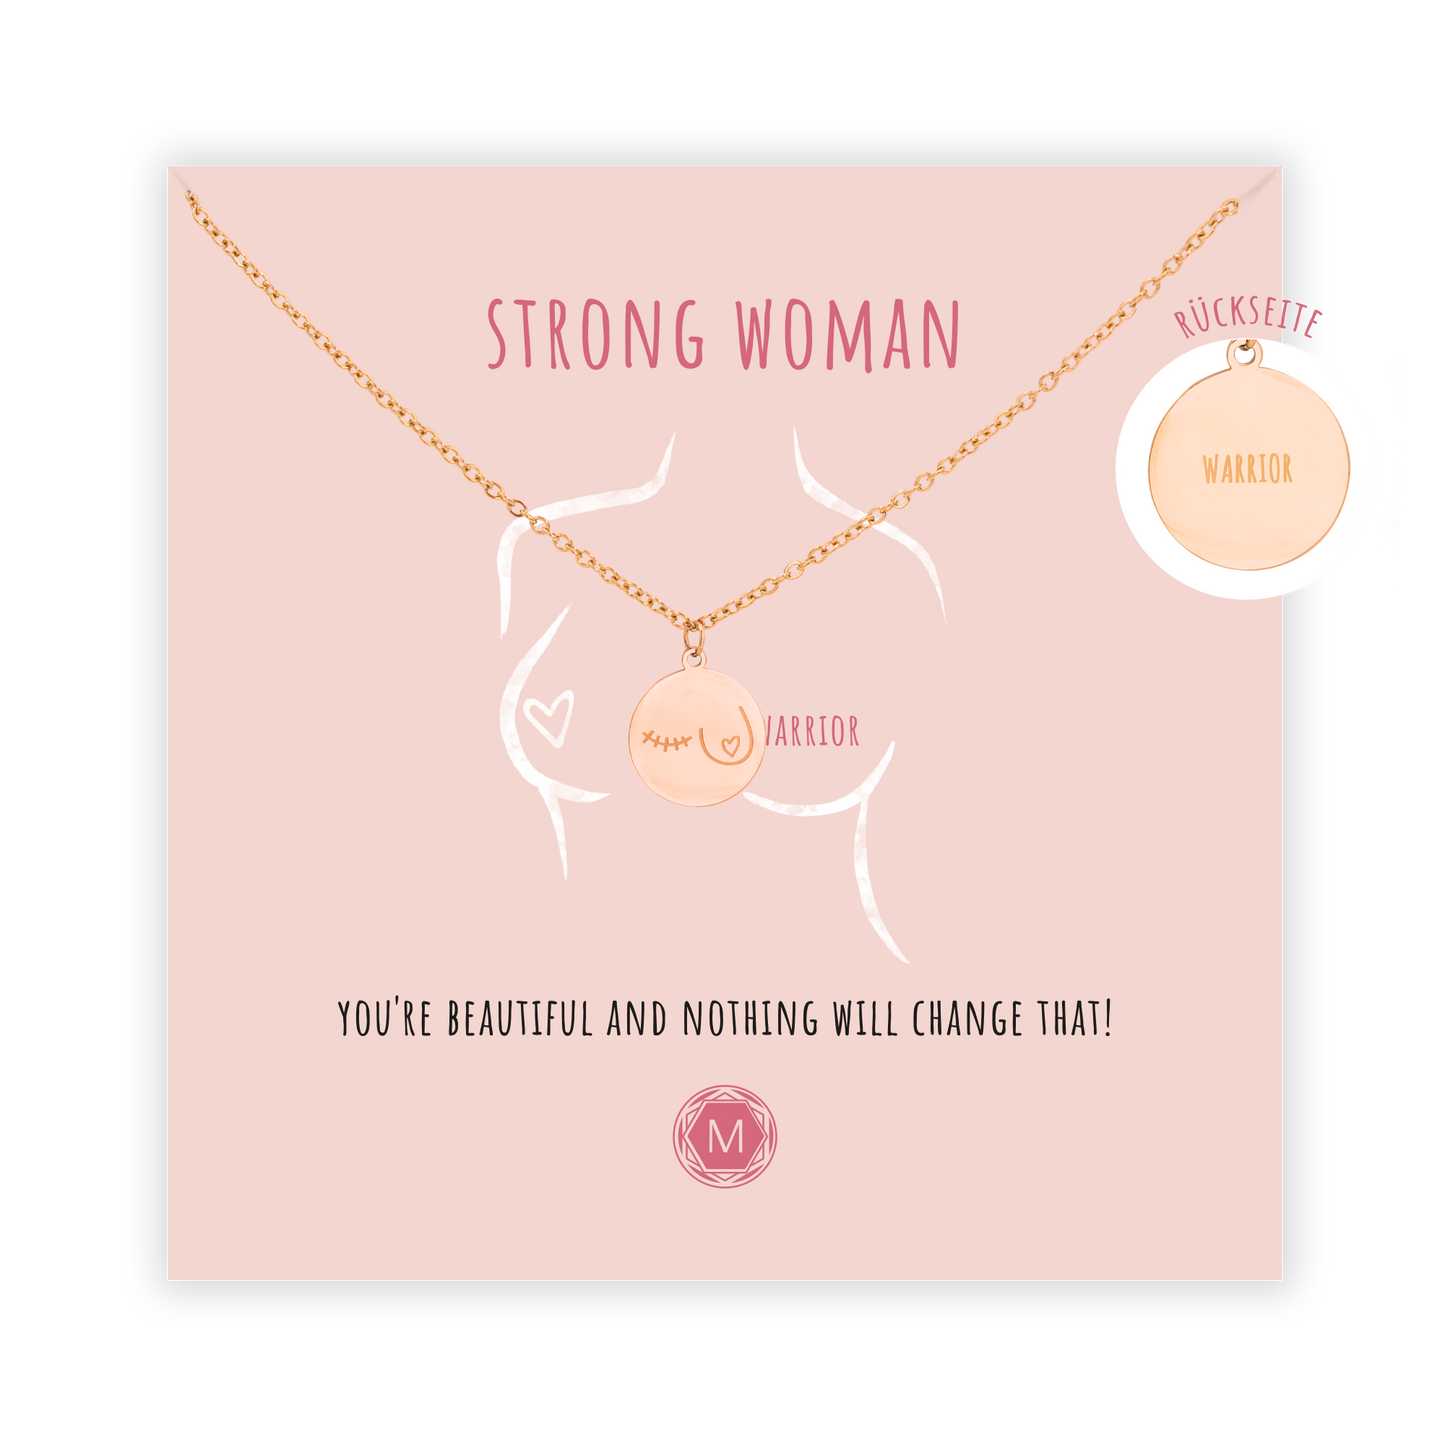 STRONG WOMAN Necklace